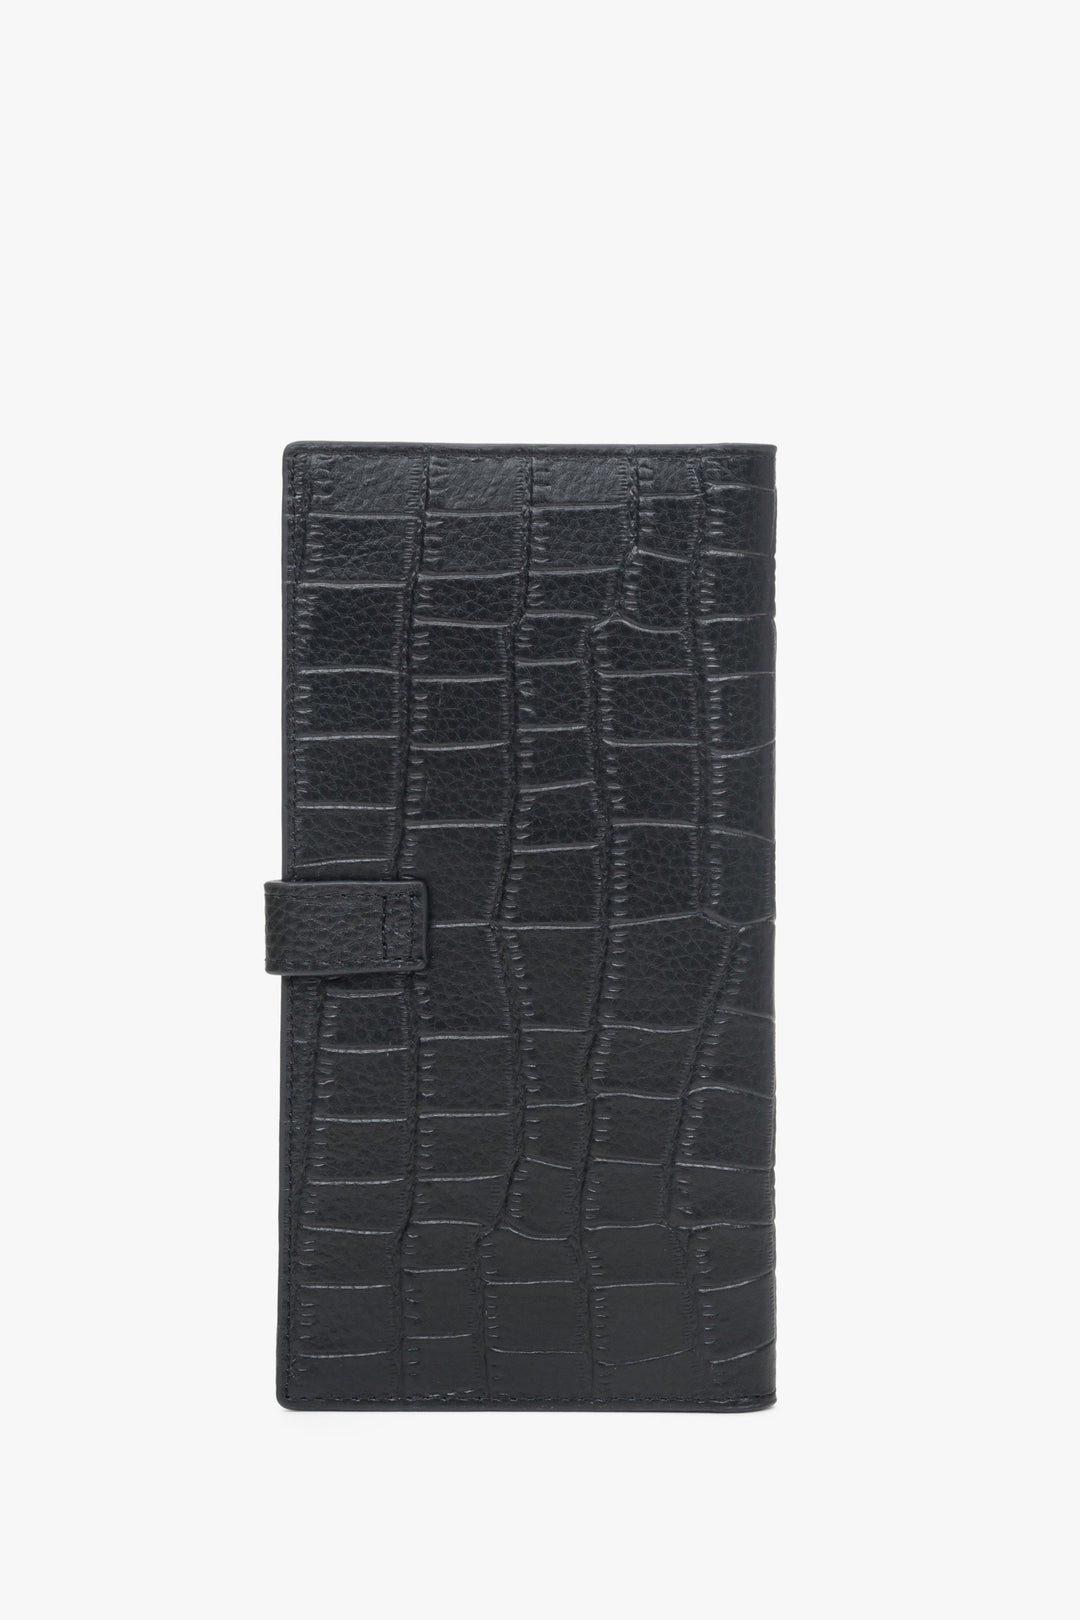 The back of a large black women's wallet made of embossed genuine leather with silver details by Estro.